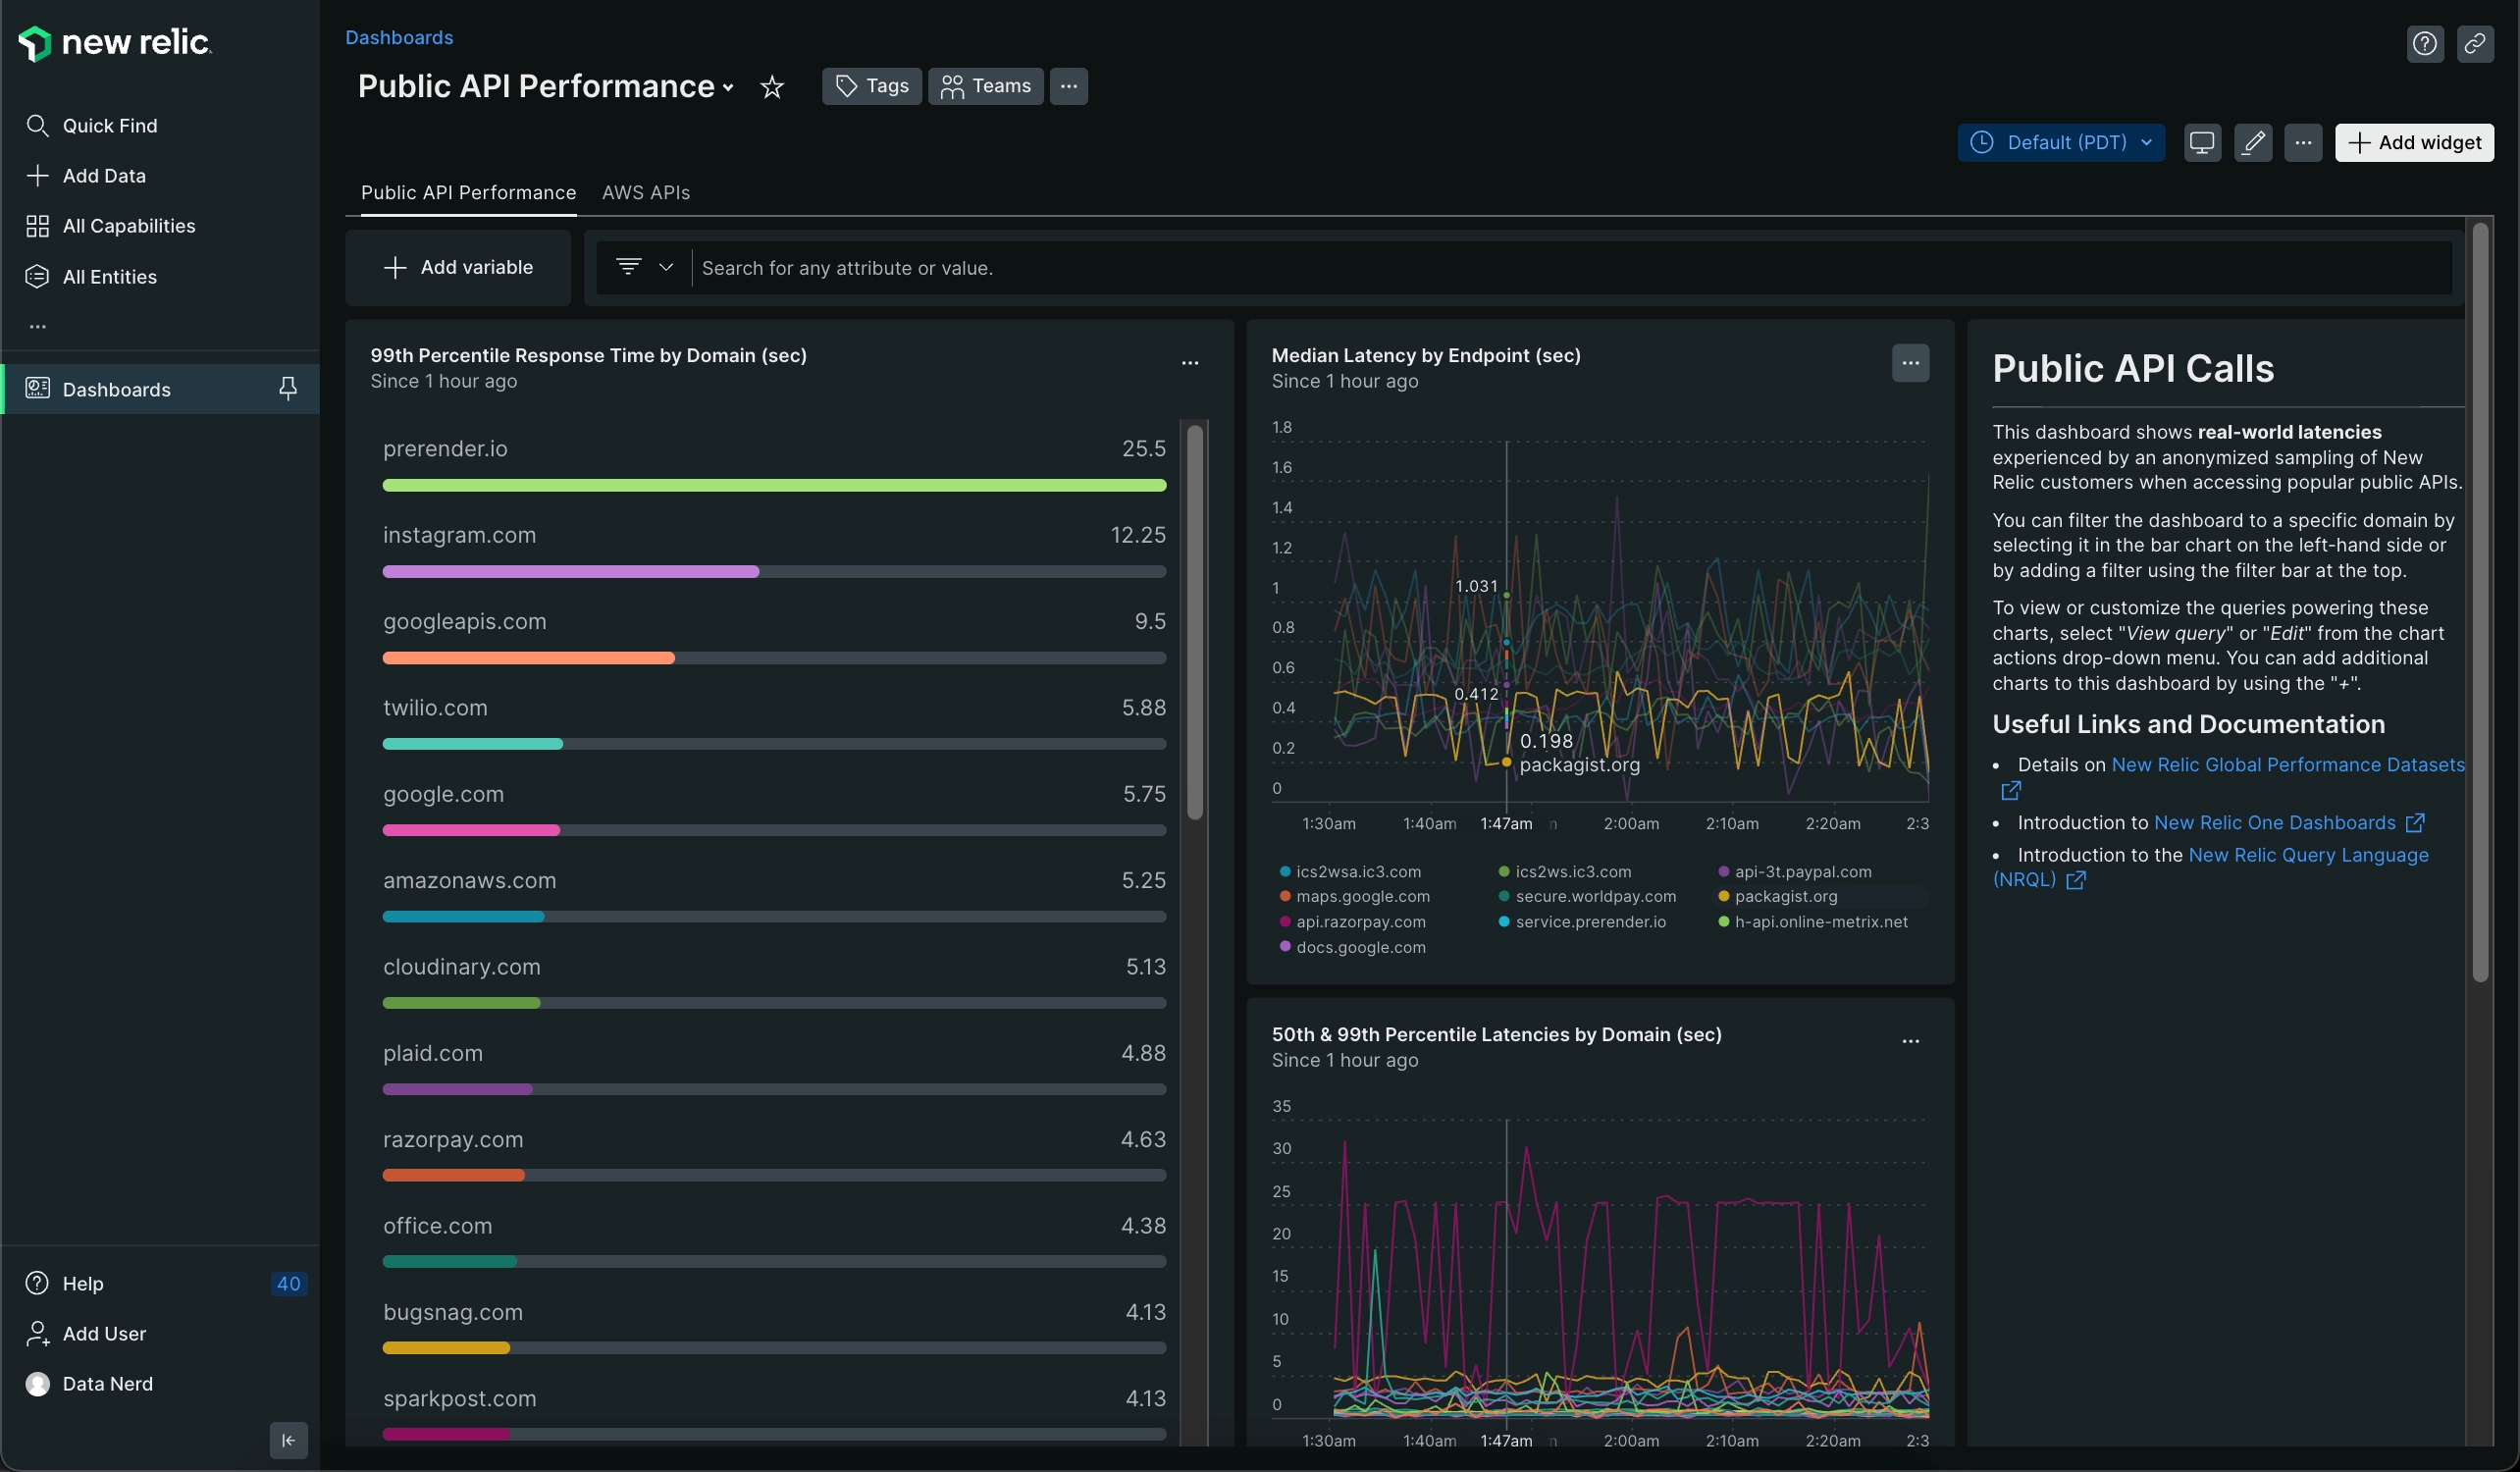 View of the Public API Performance dashboard screen.